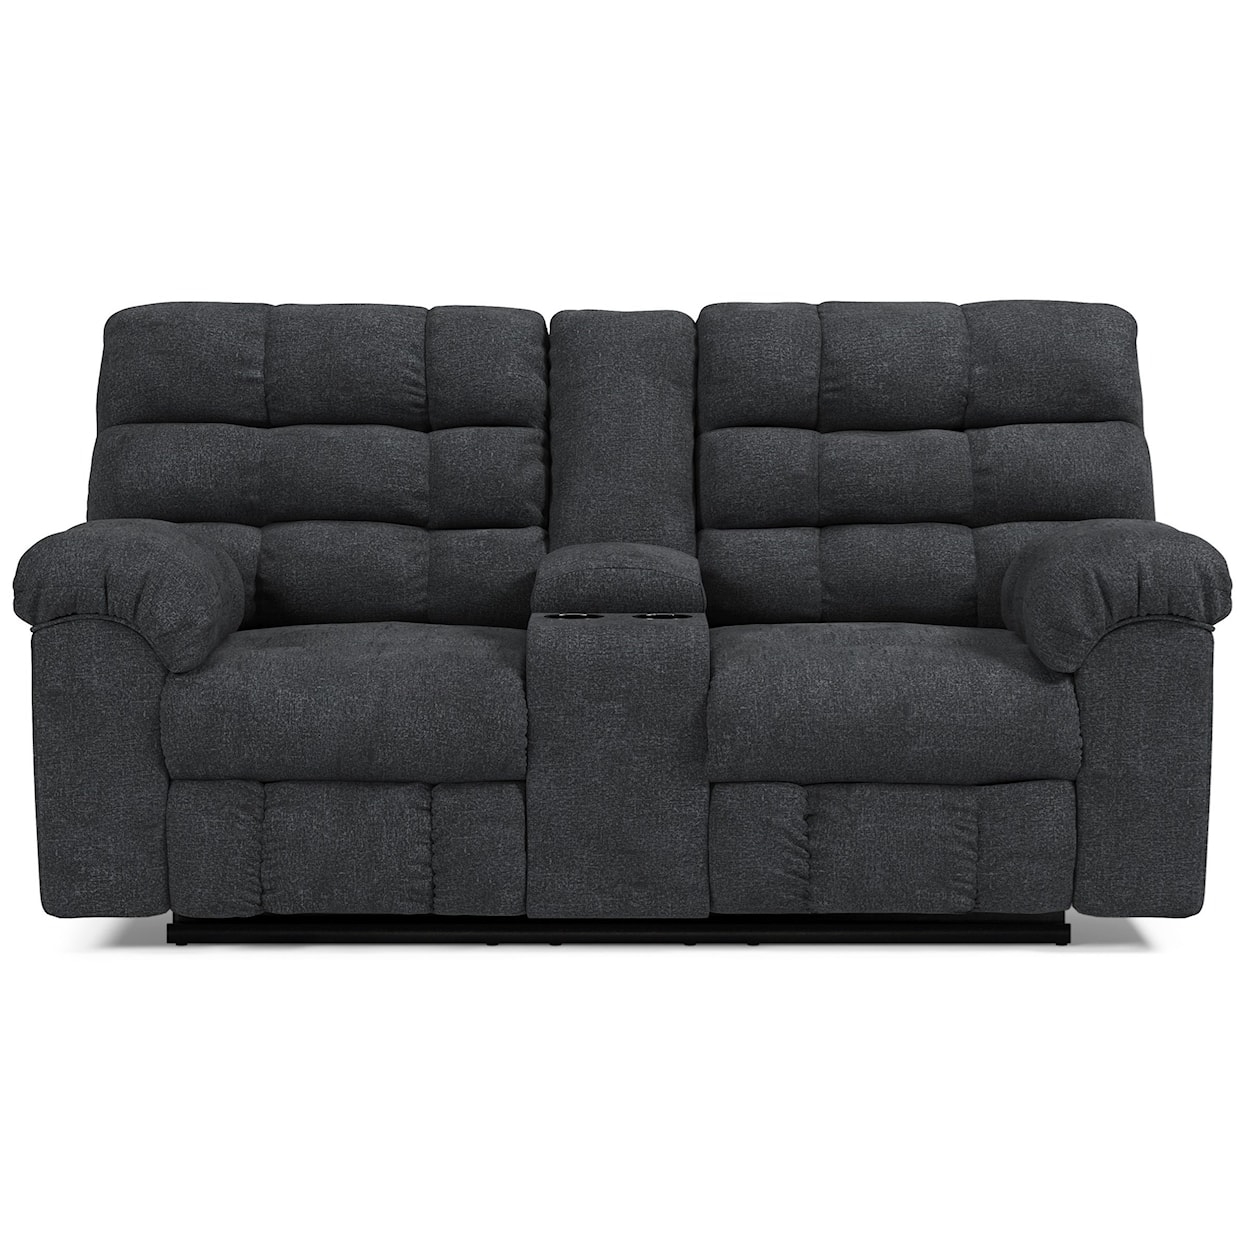 Benchcraft Wilhurst Double Reclining Loveseat w/ Console